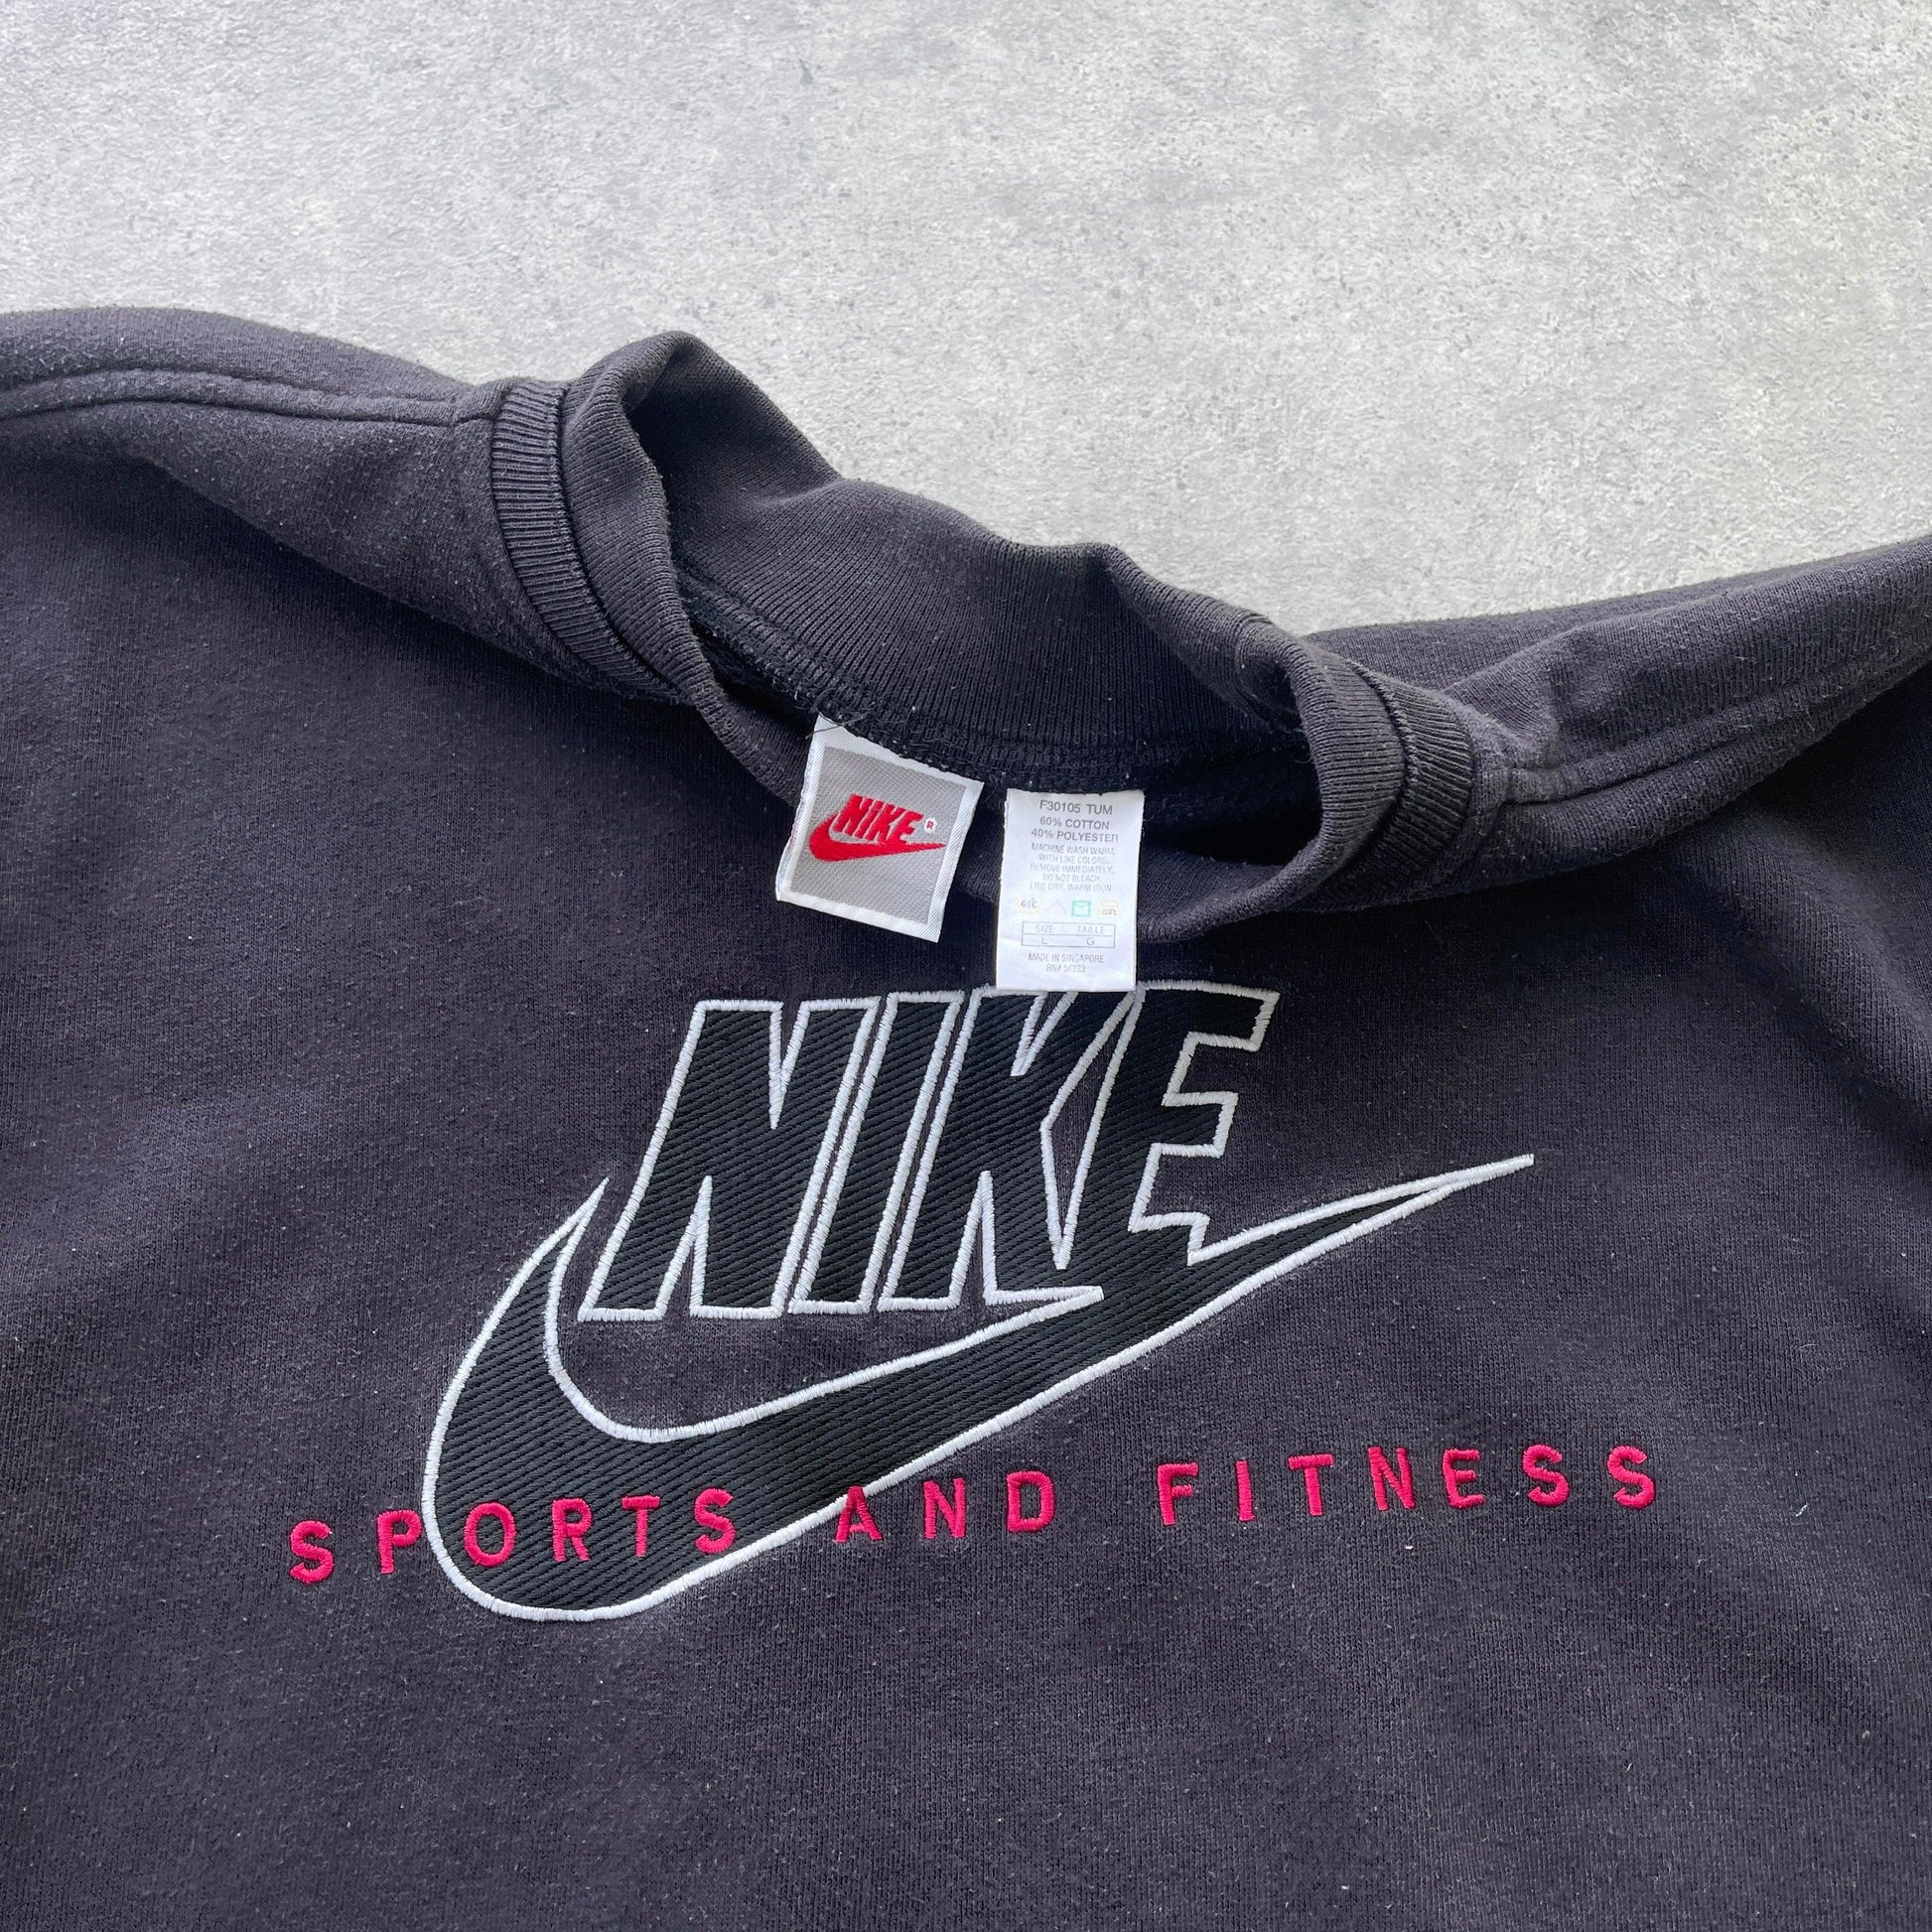 Nike RARE 1990s ‘sports and fitness’ heavyweight embroidered sweatshirt (L) - Known Source